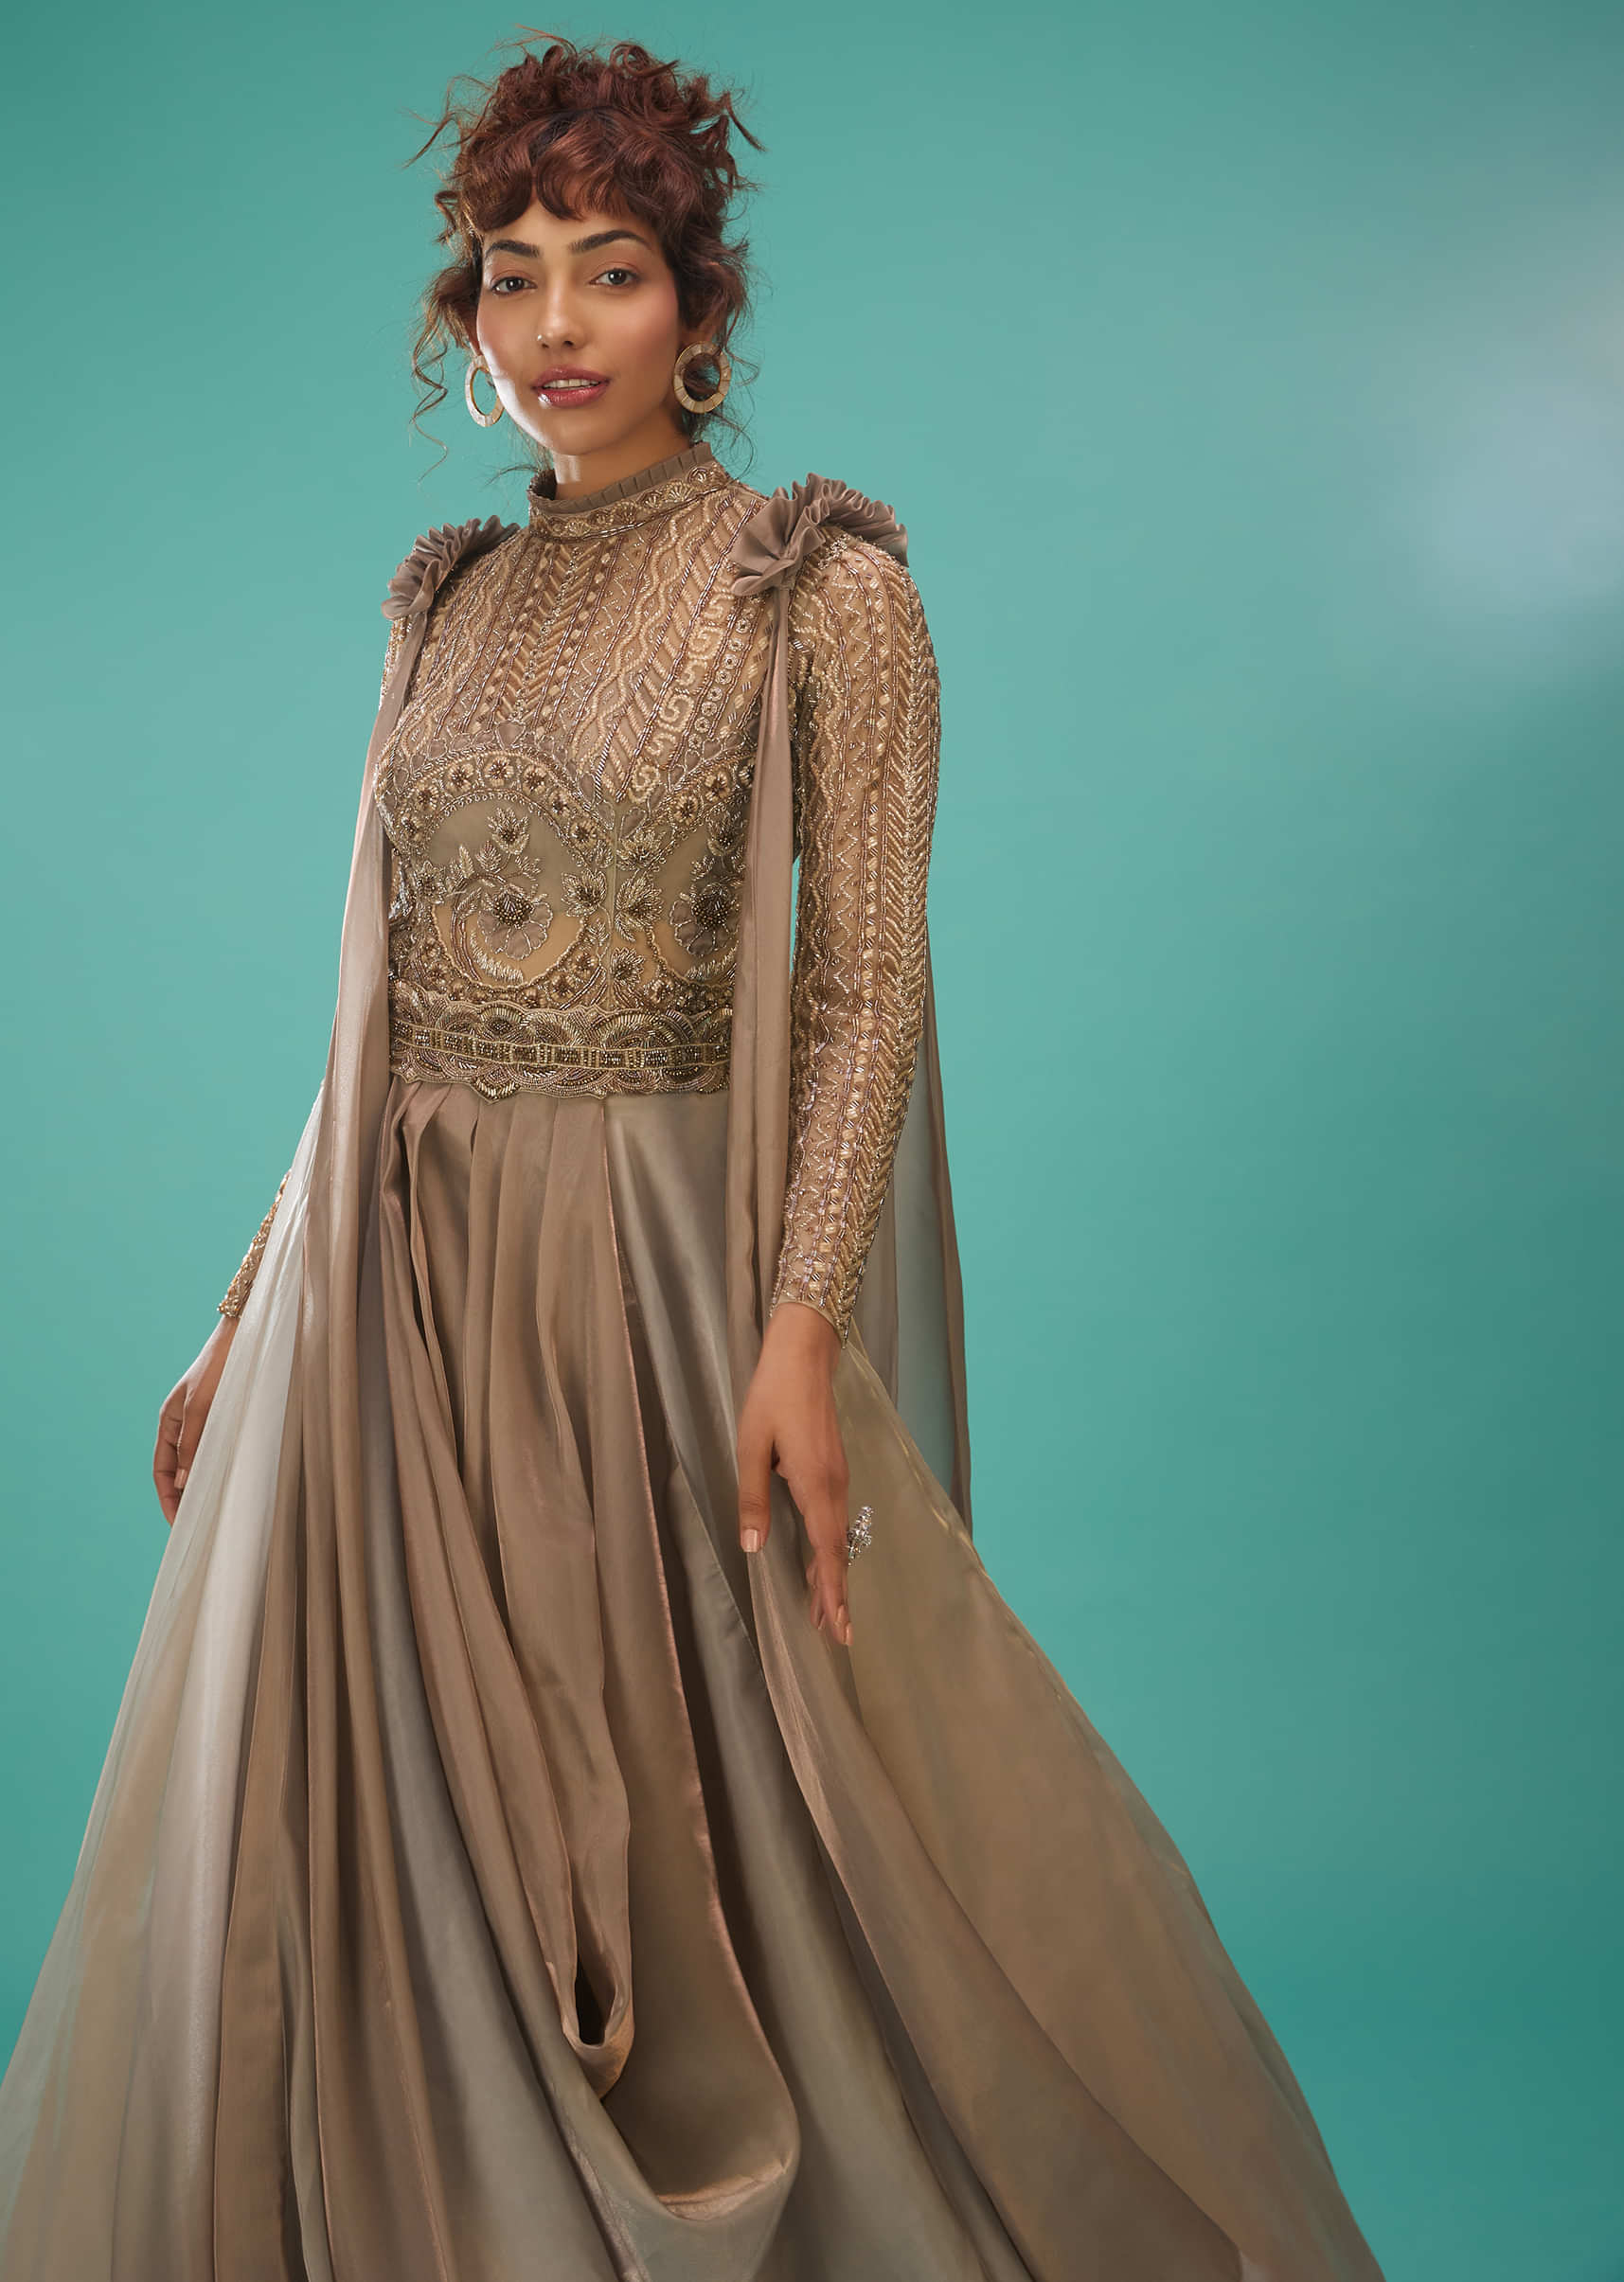 Mocha Brown Embroidered Ball Gown In Organza With A Gradient Shade Of Silver Lining